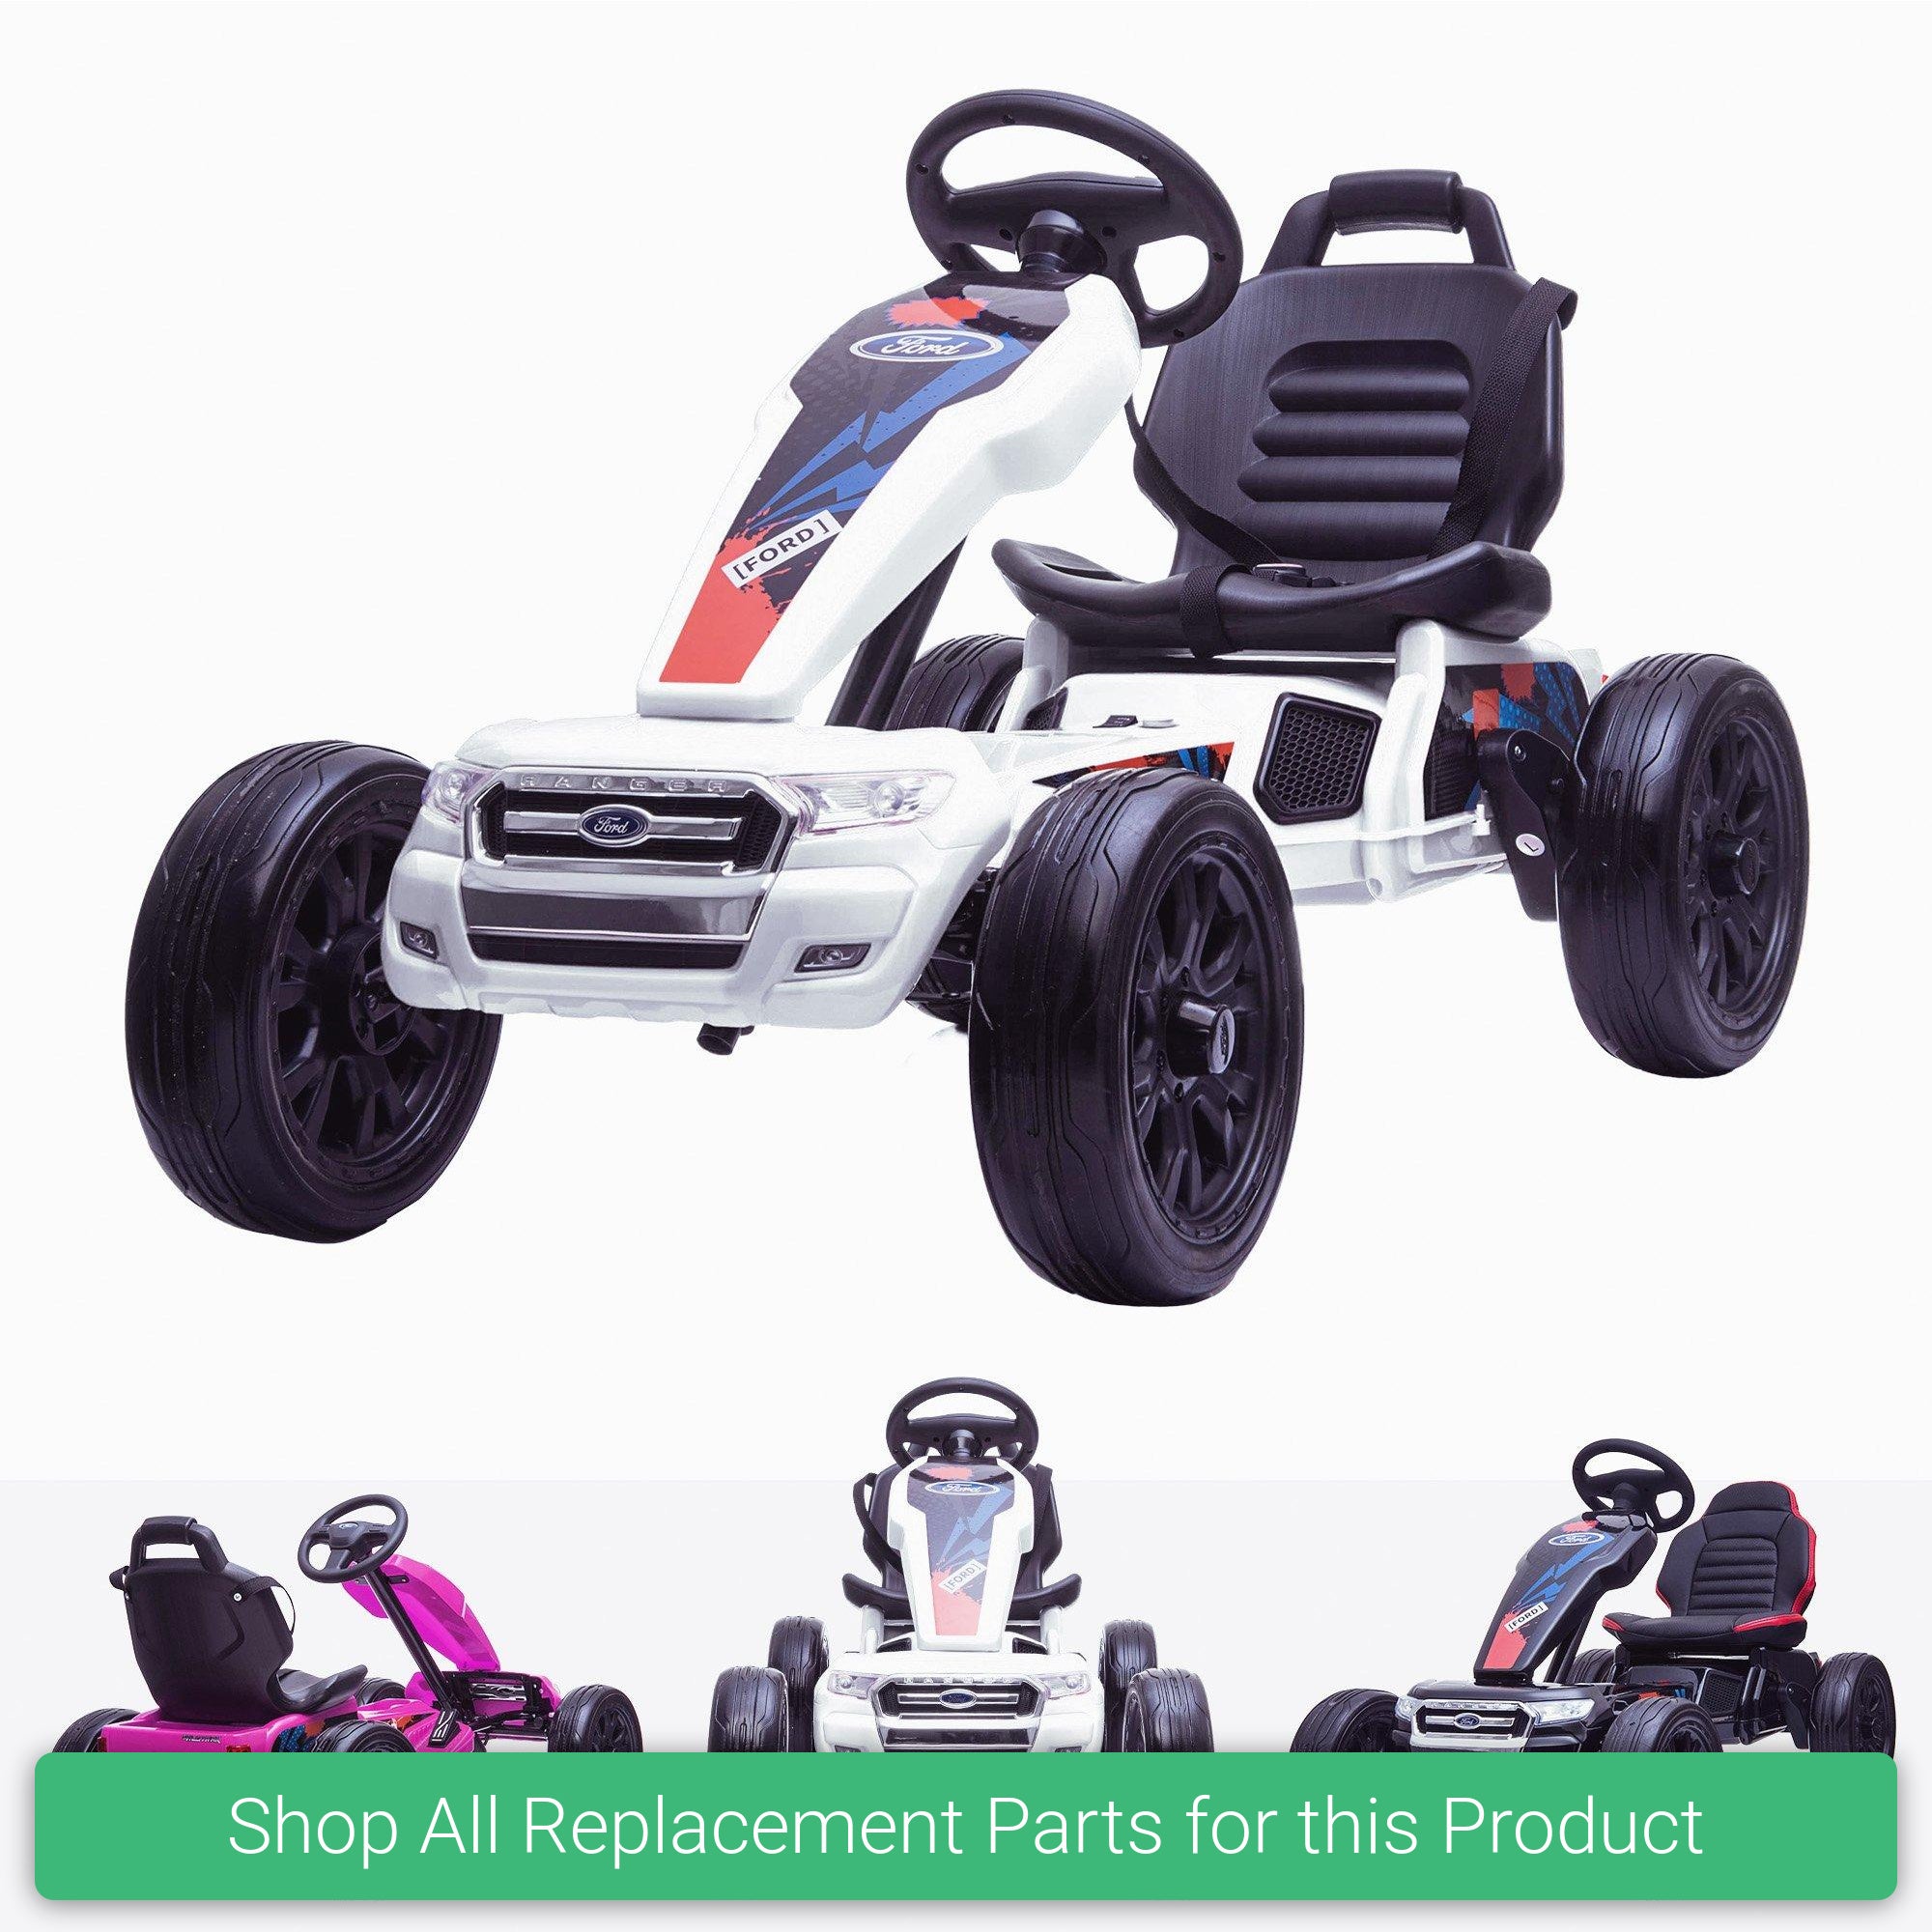 Replacement Parts and Spares for Kids Ford Ranger Licensed Electric Go Kart - FORD-KRT-VARI - DK-G01 FORD